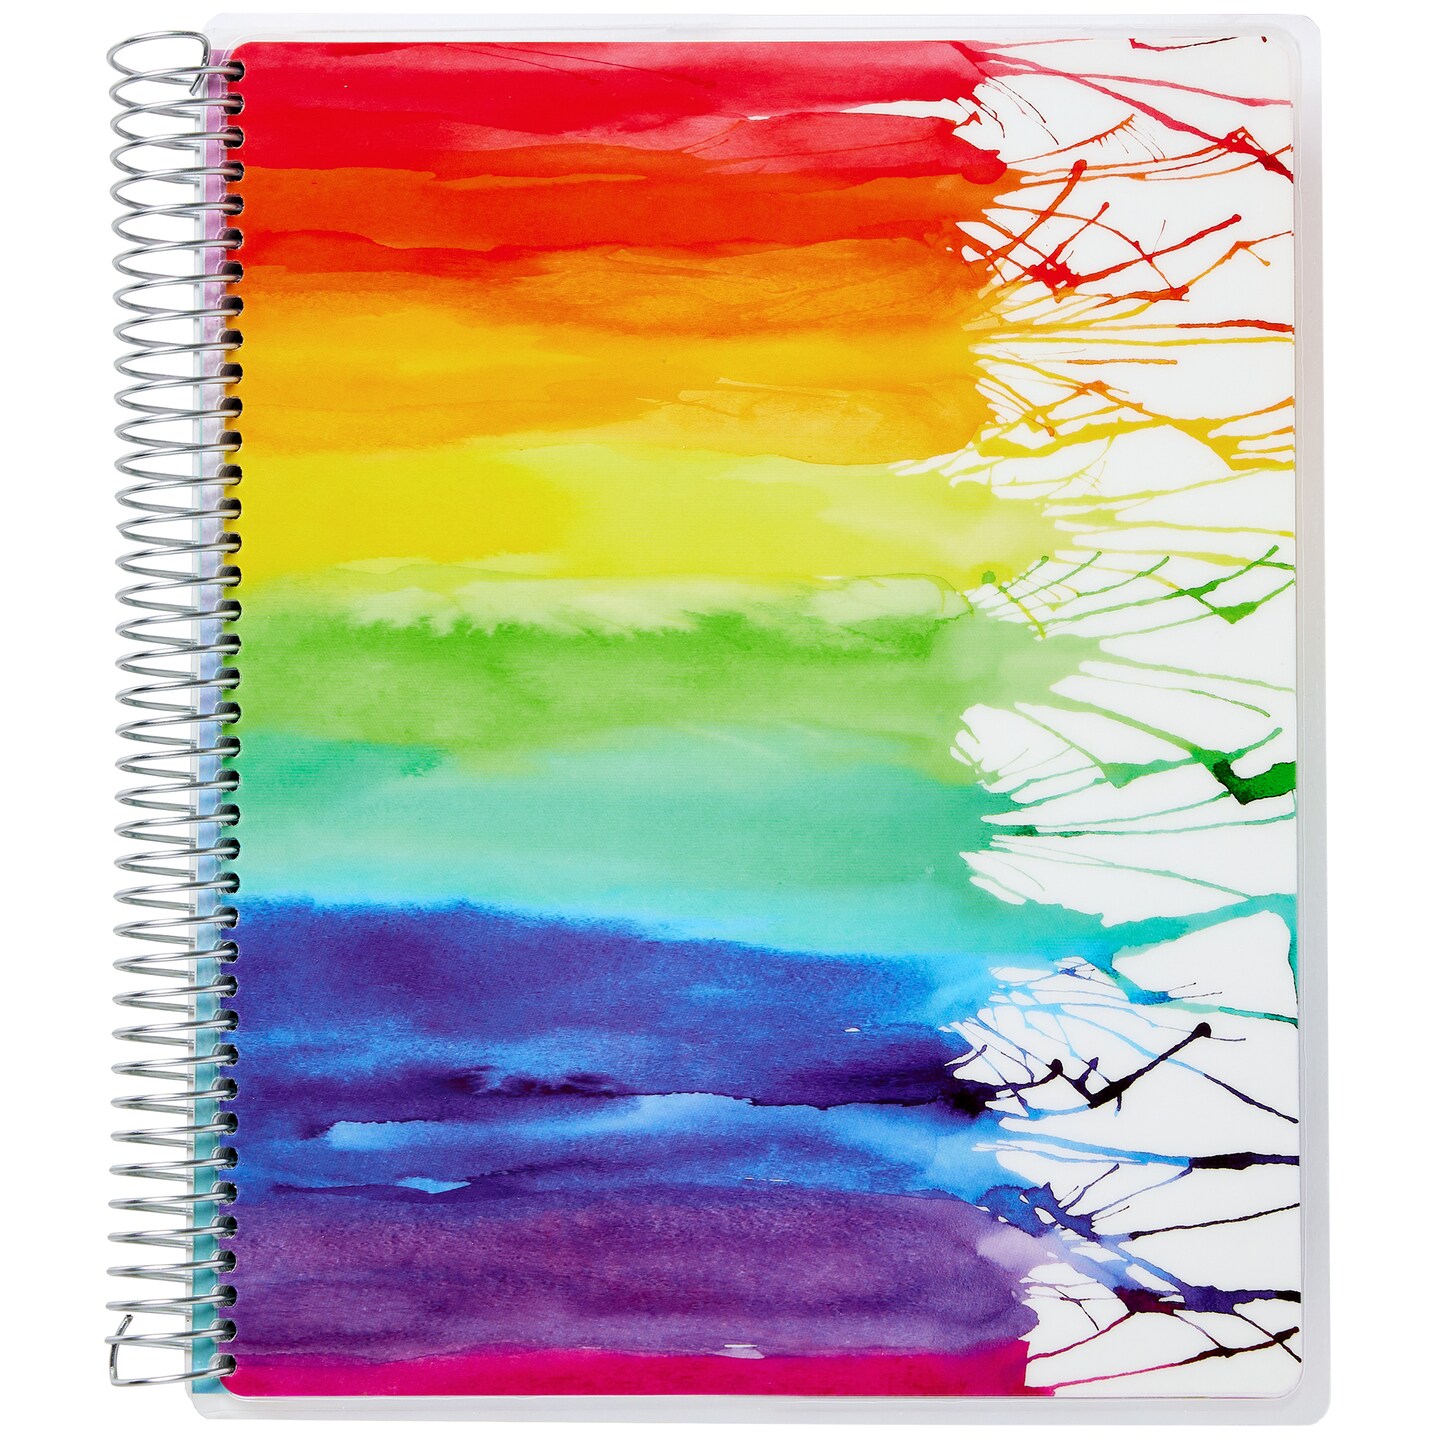 Avery + Amy Tangerine Designer Collection Planner, Undated 12-Month Planner with Stickers, 8.25&#x22; x 9.75&#x22;, Rainbow Paint Design (29880)